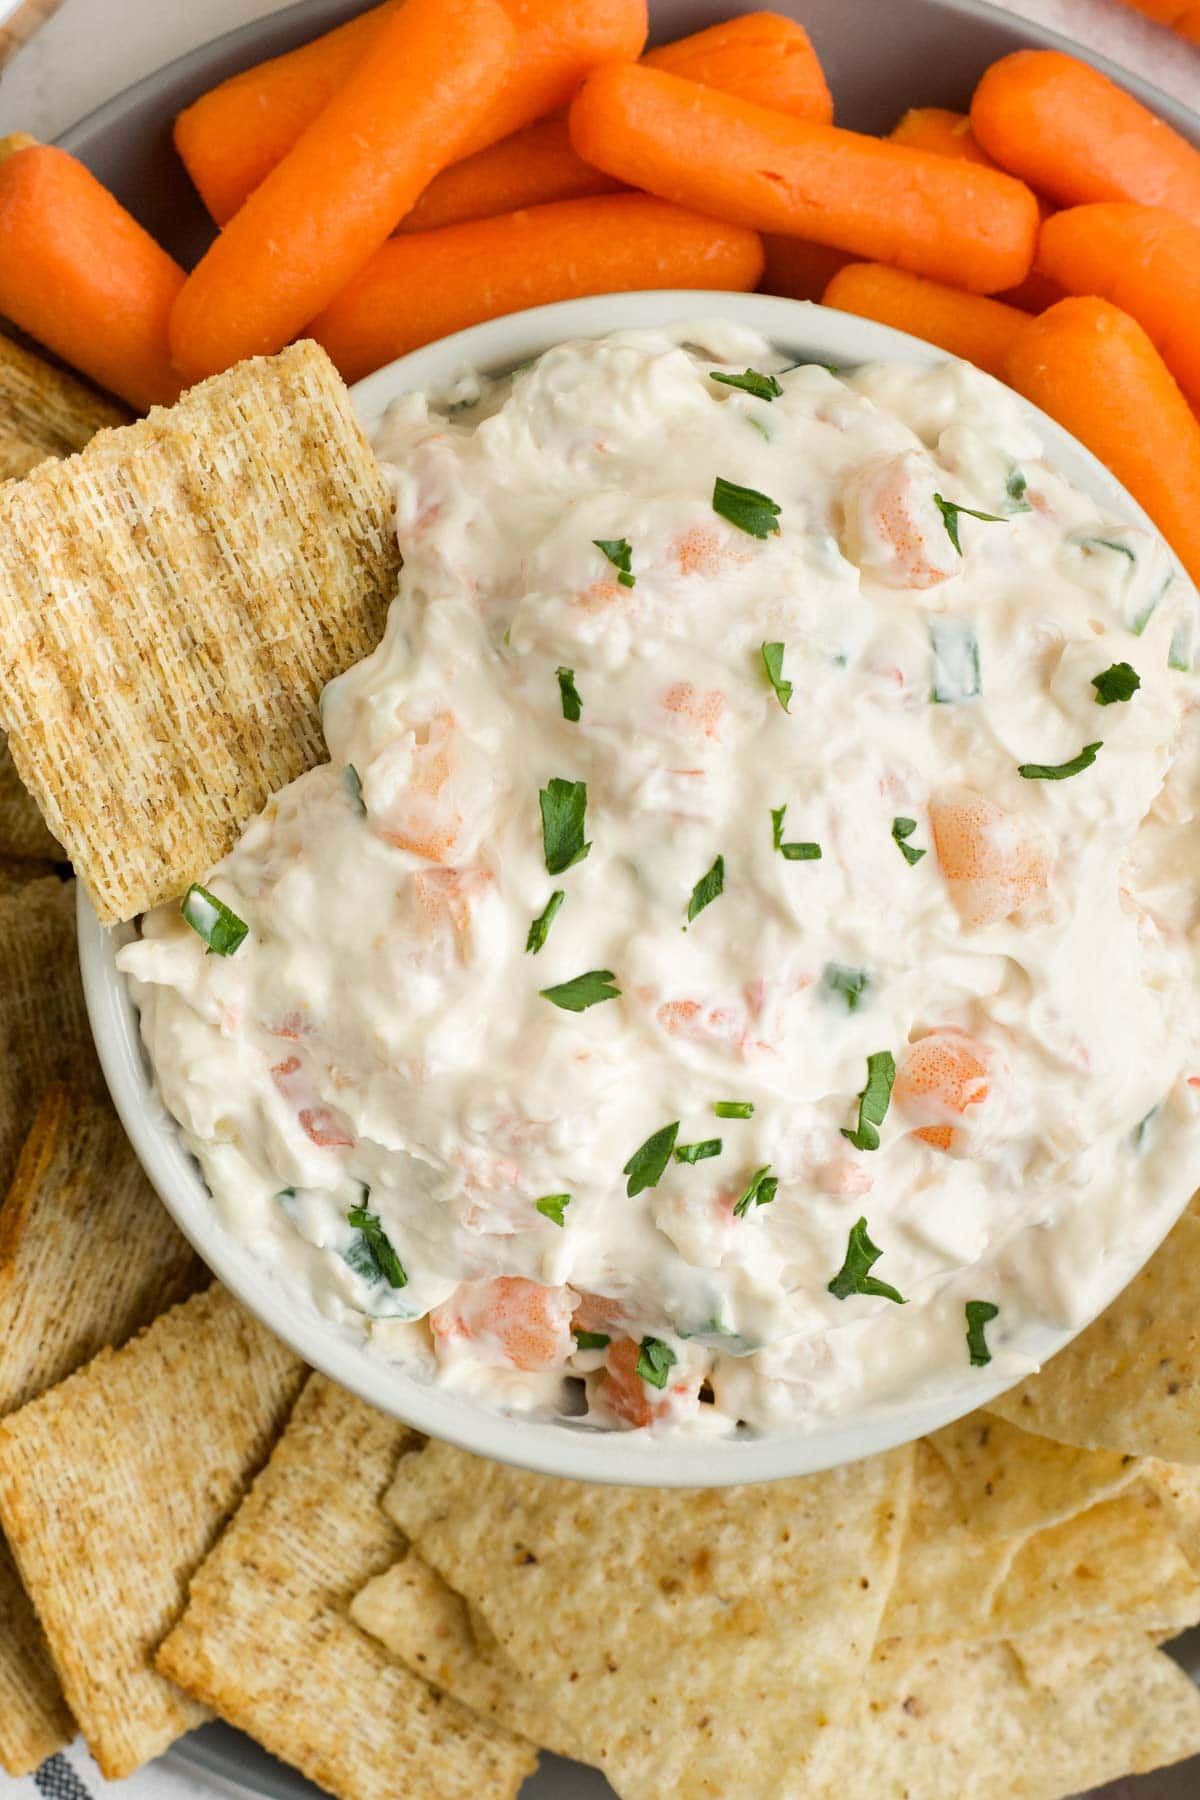 Creamy shrimp dip in a small dish surrounded by baby carrots and Triscuit crackers.